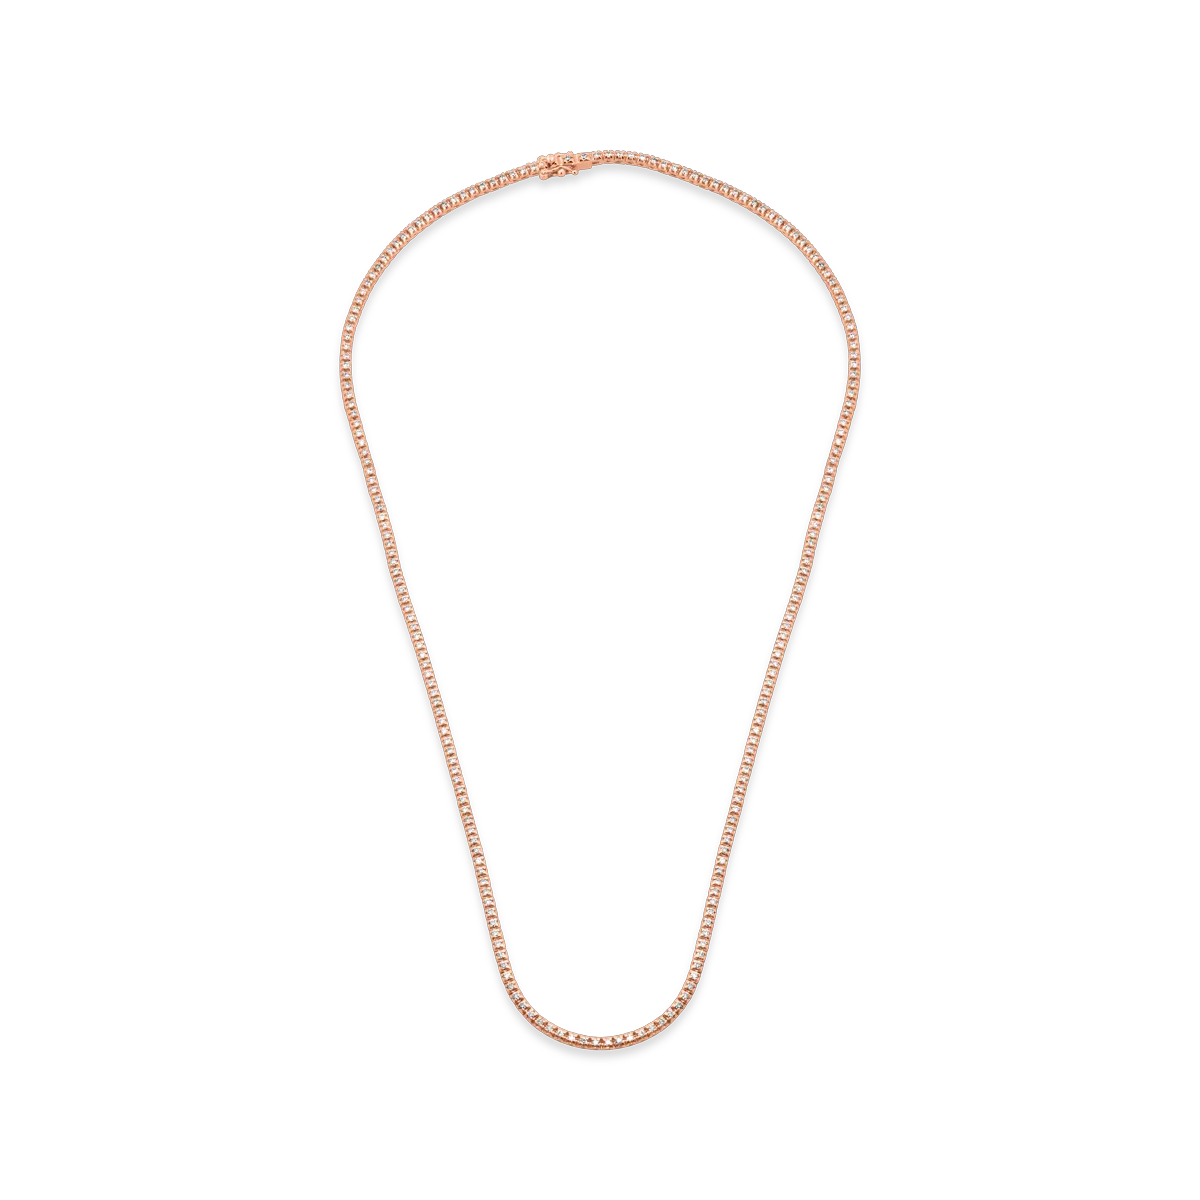 18K rose gold tennis necklace with 2ct brown diamonds